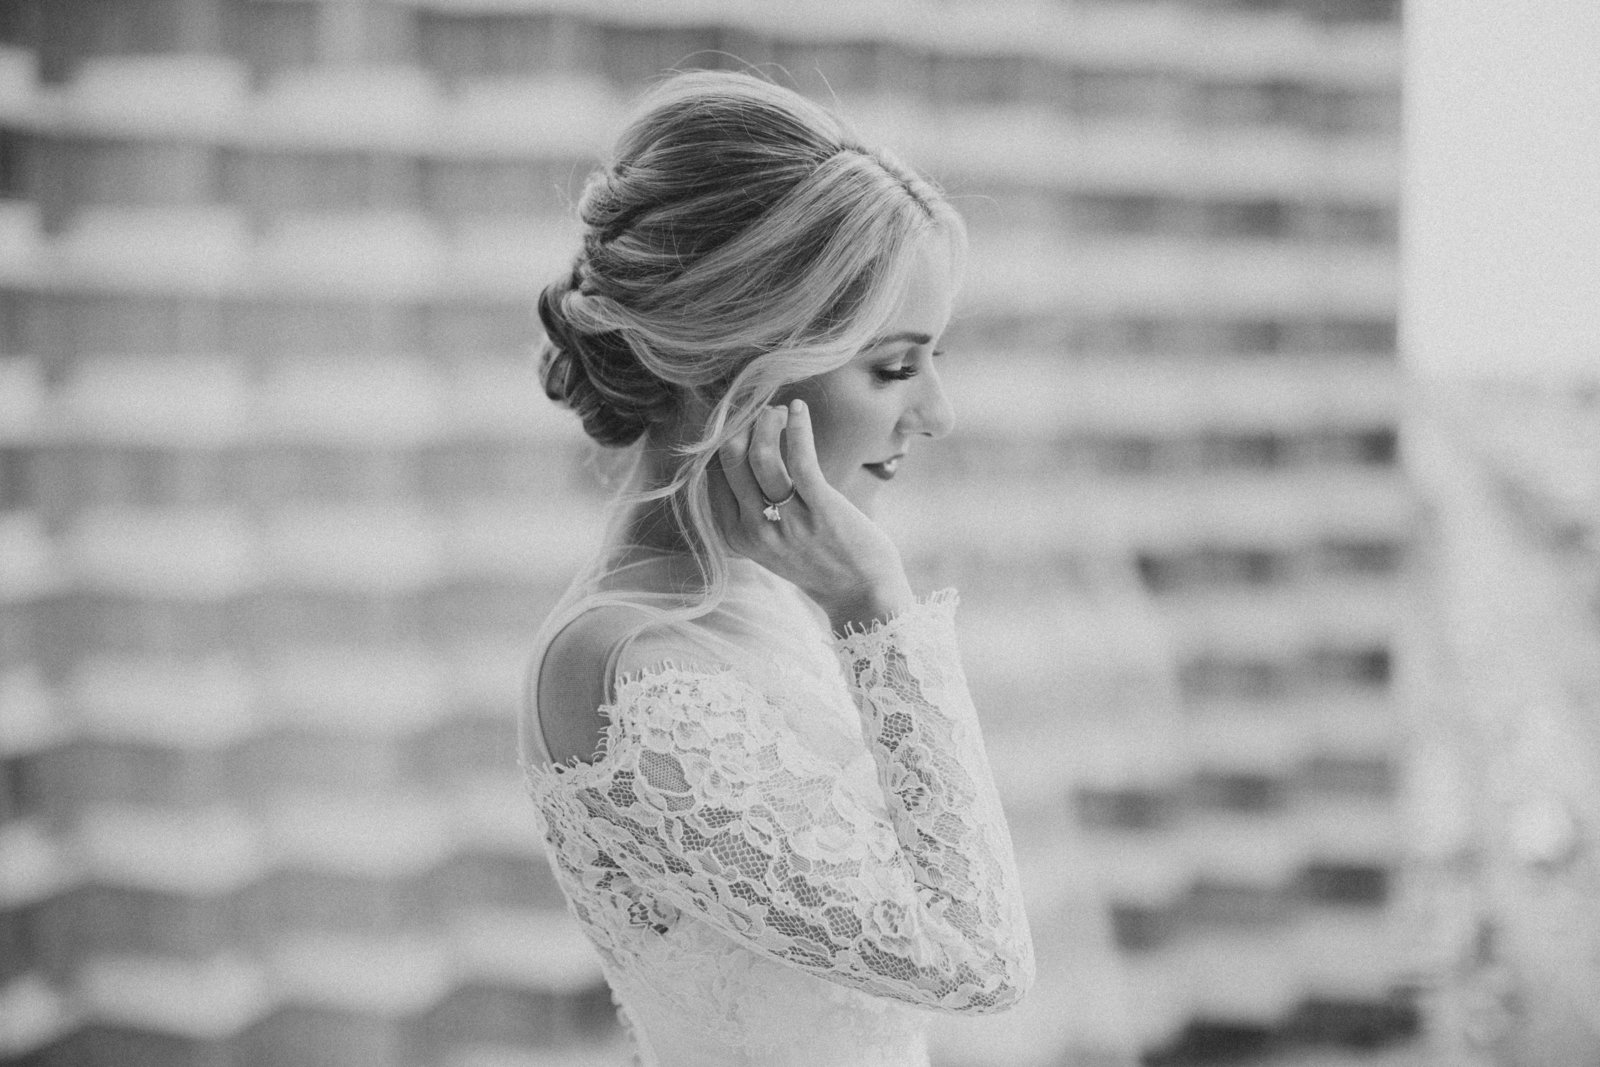 blonde woman wearing lace bridal gown with hair in classic updo